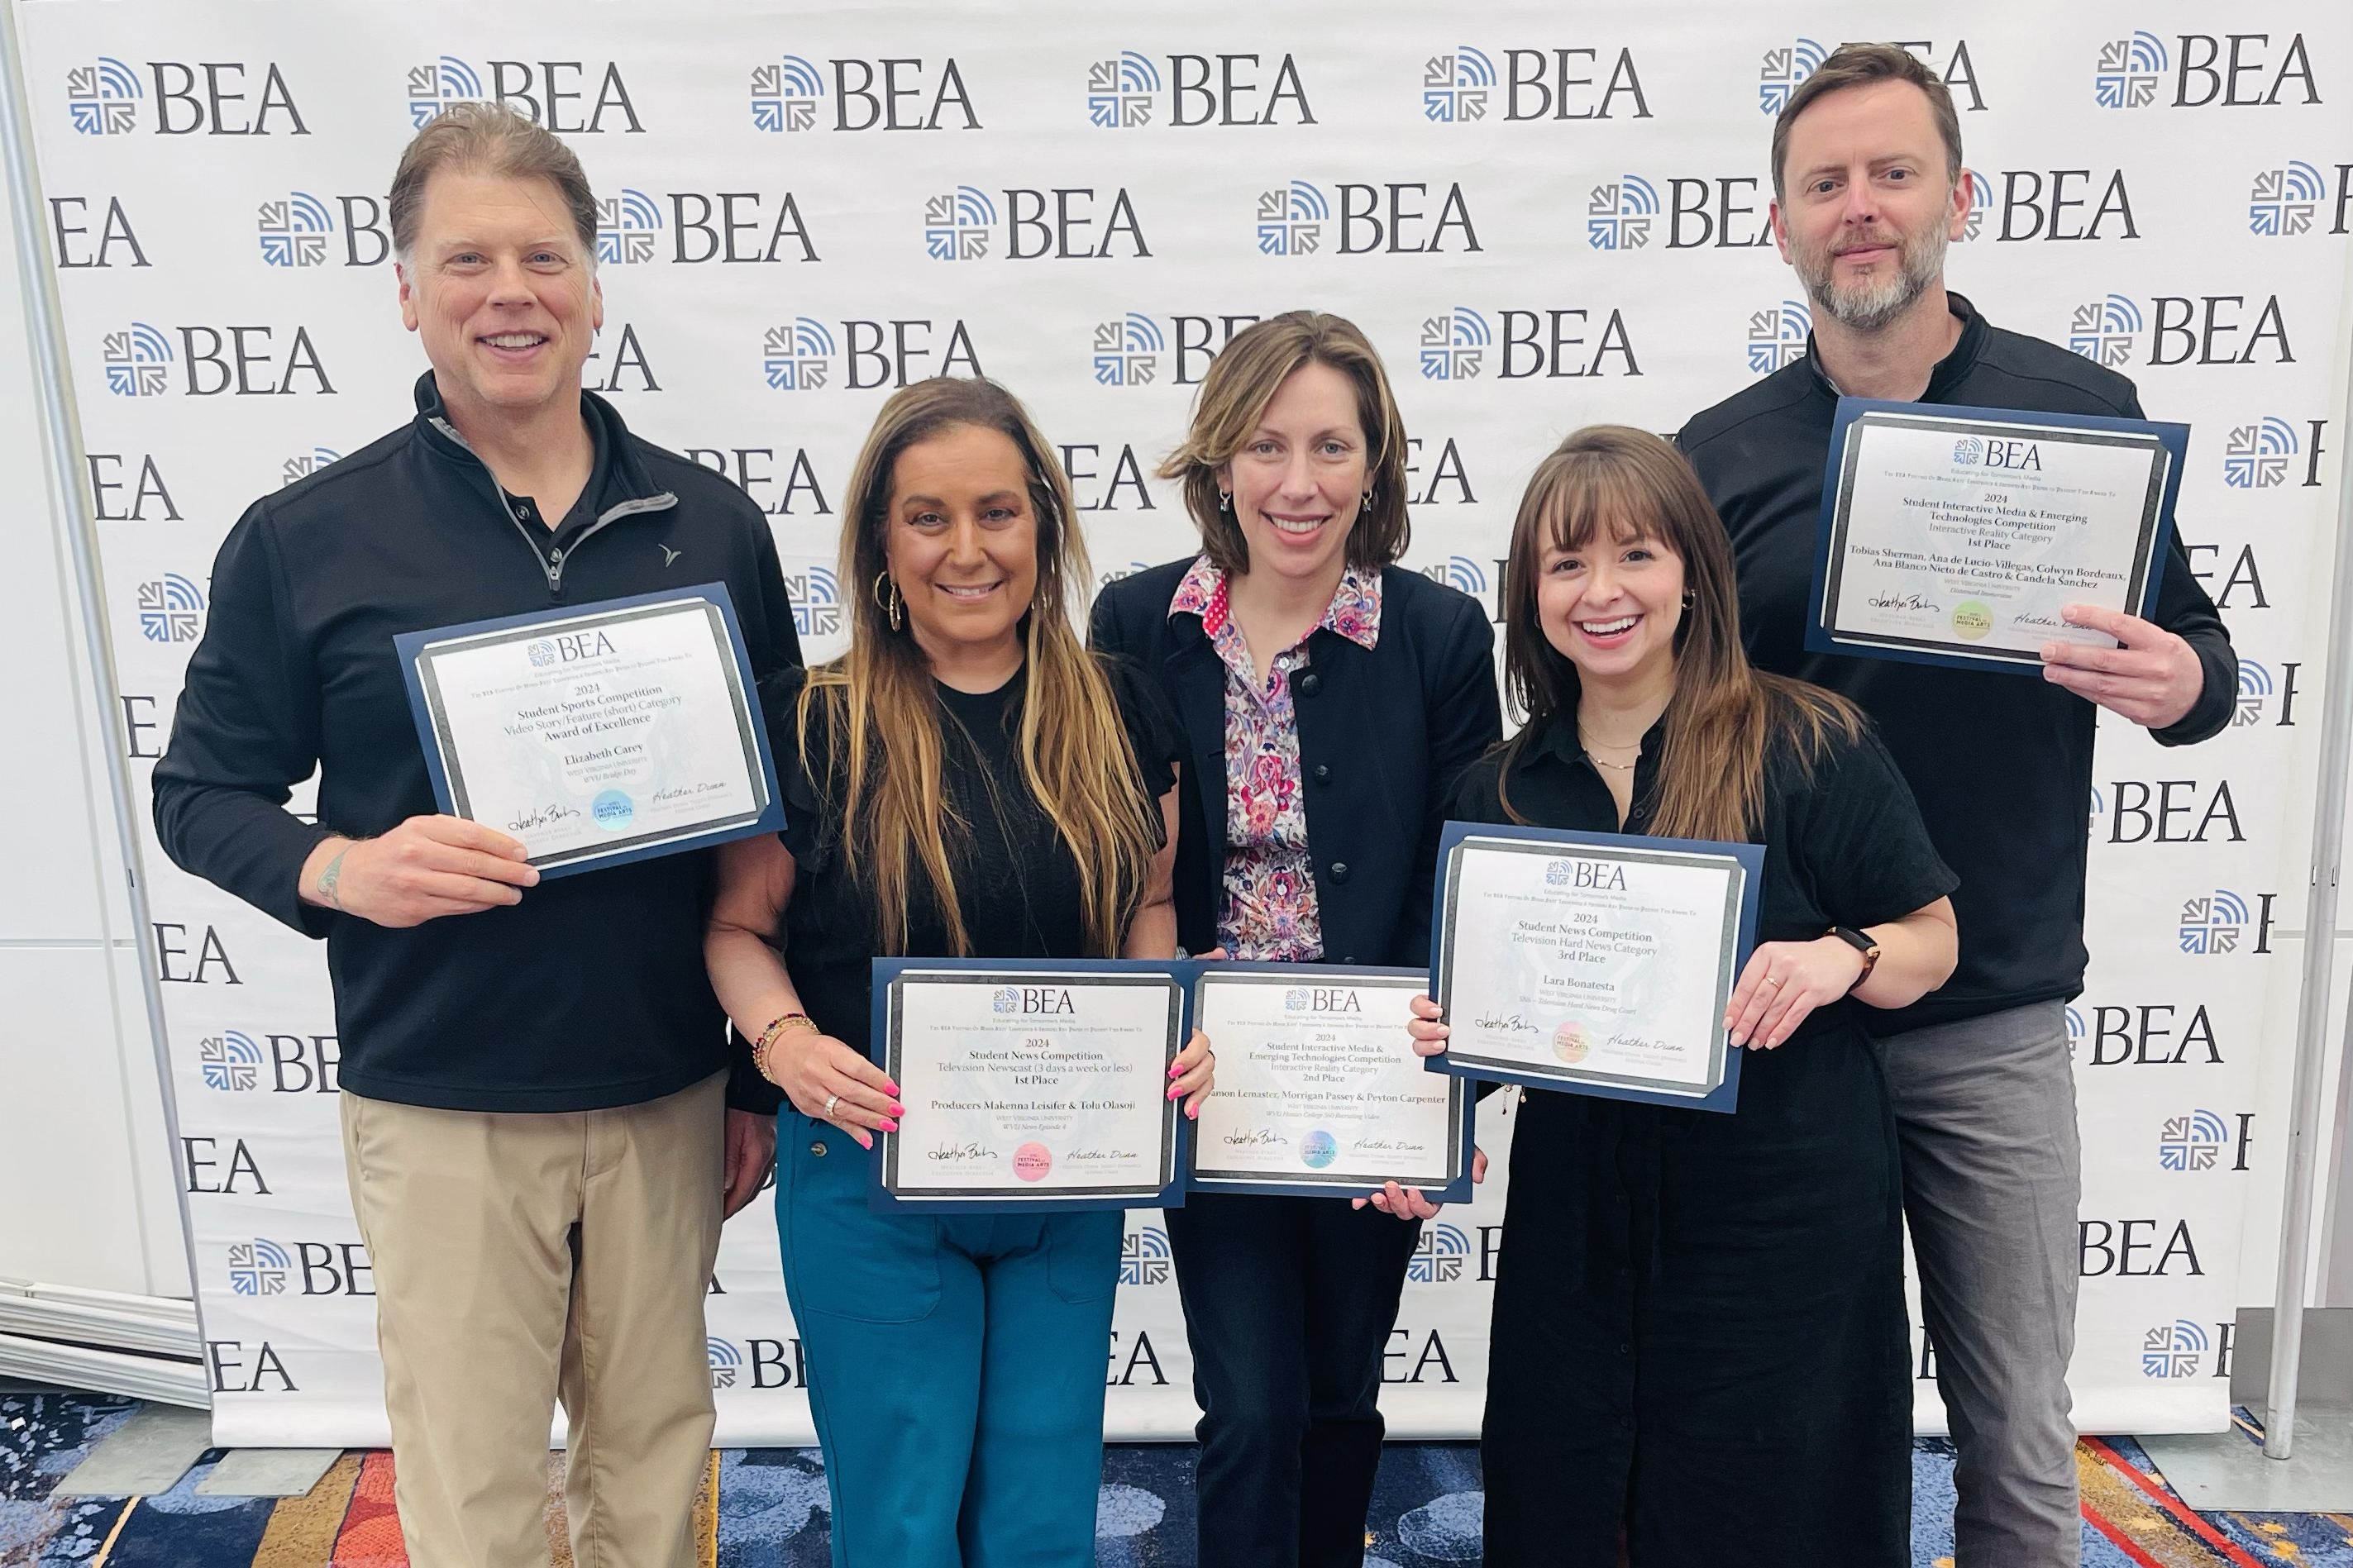 College faculty pose with BEA awards